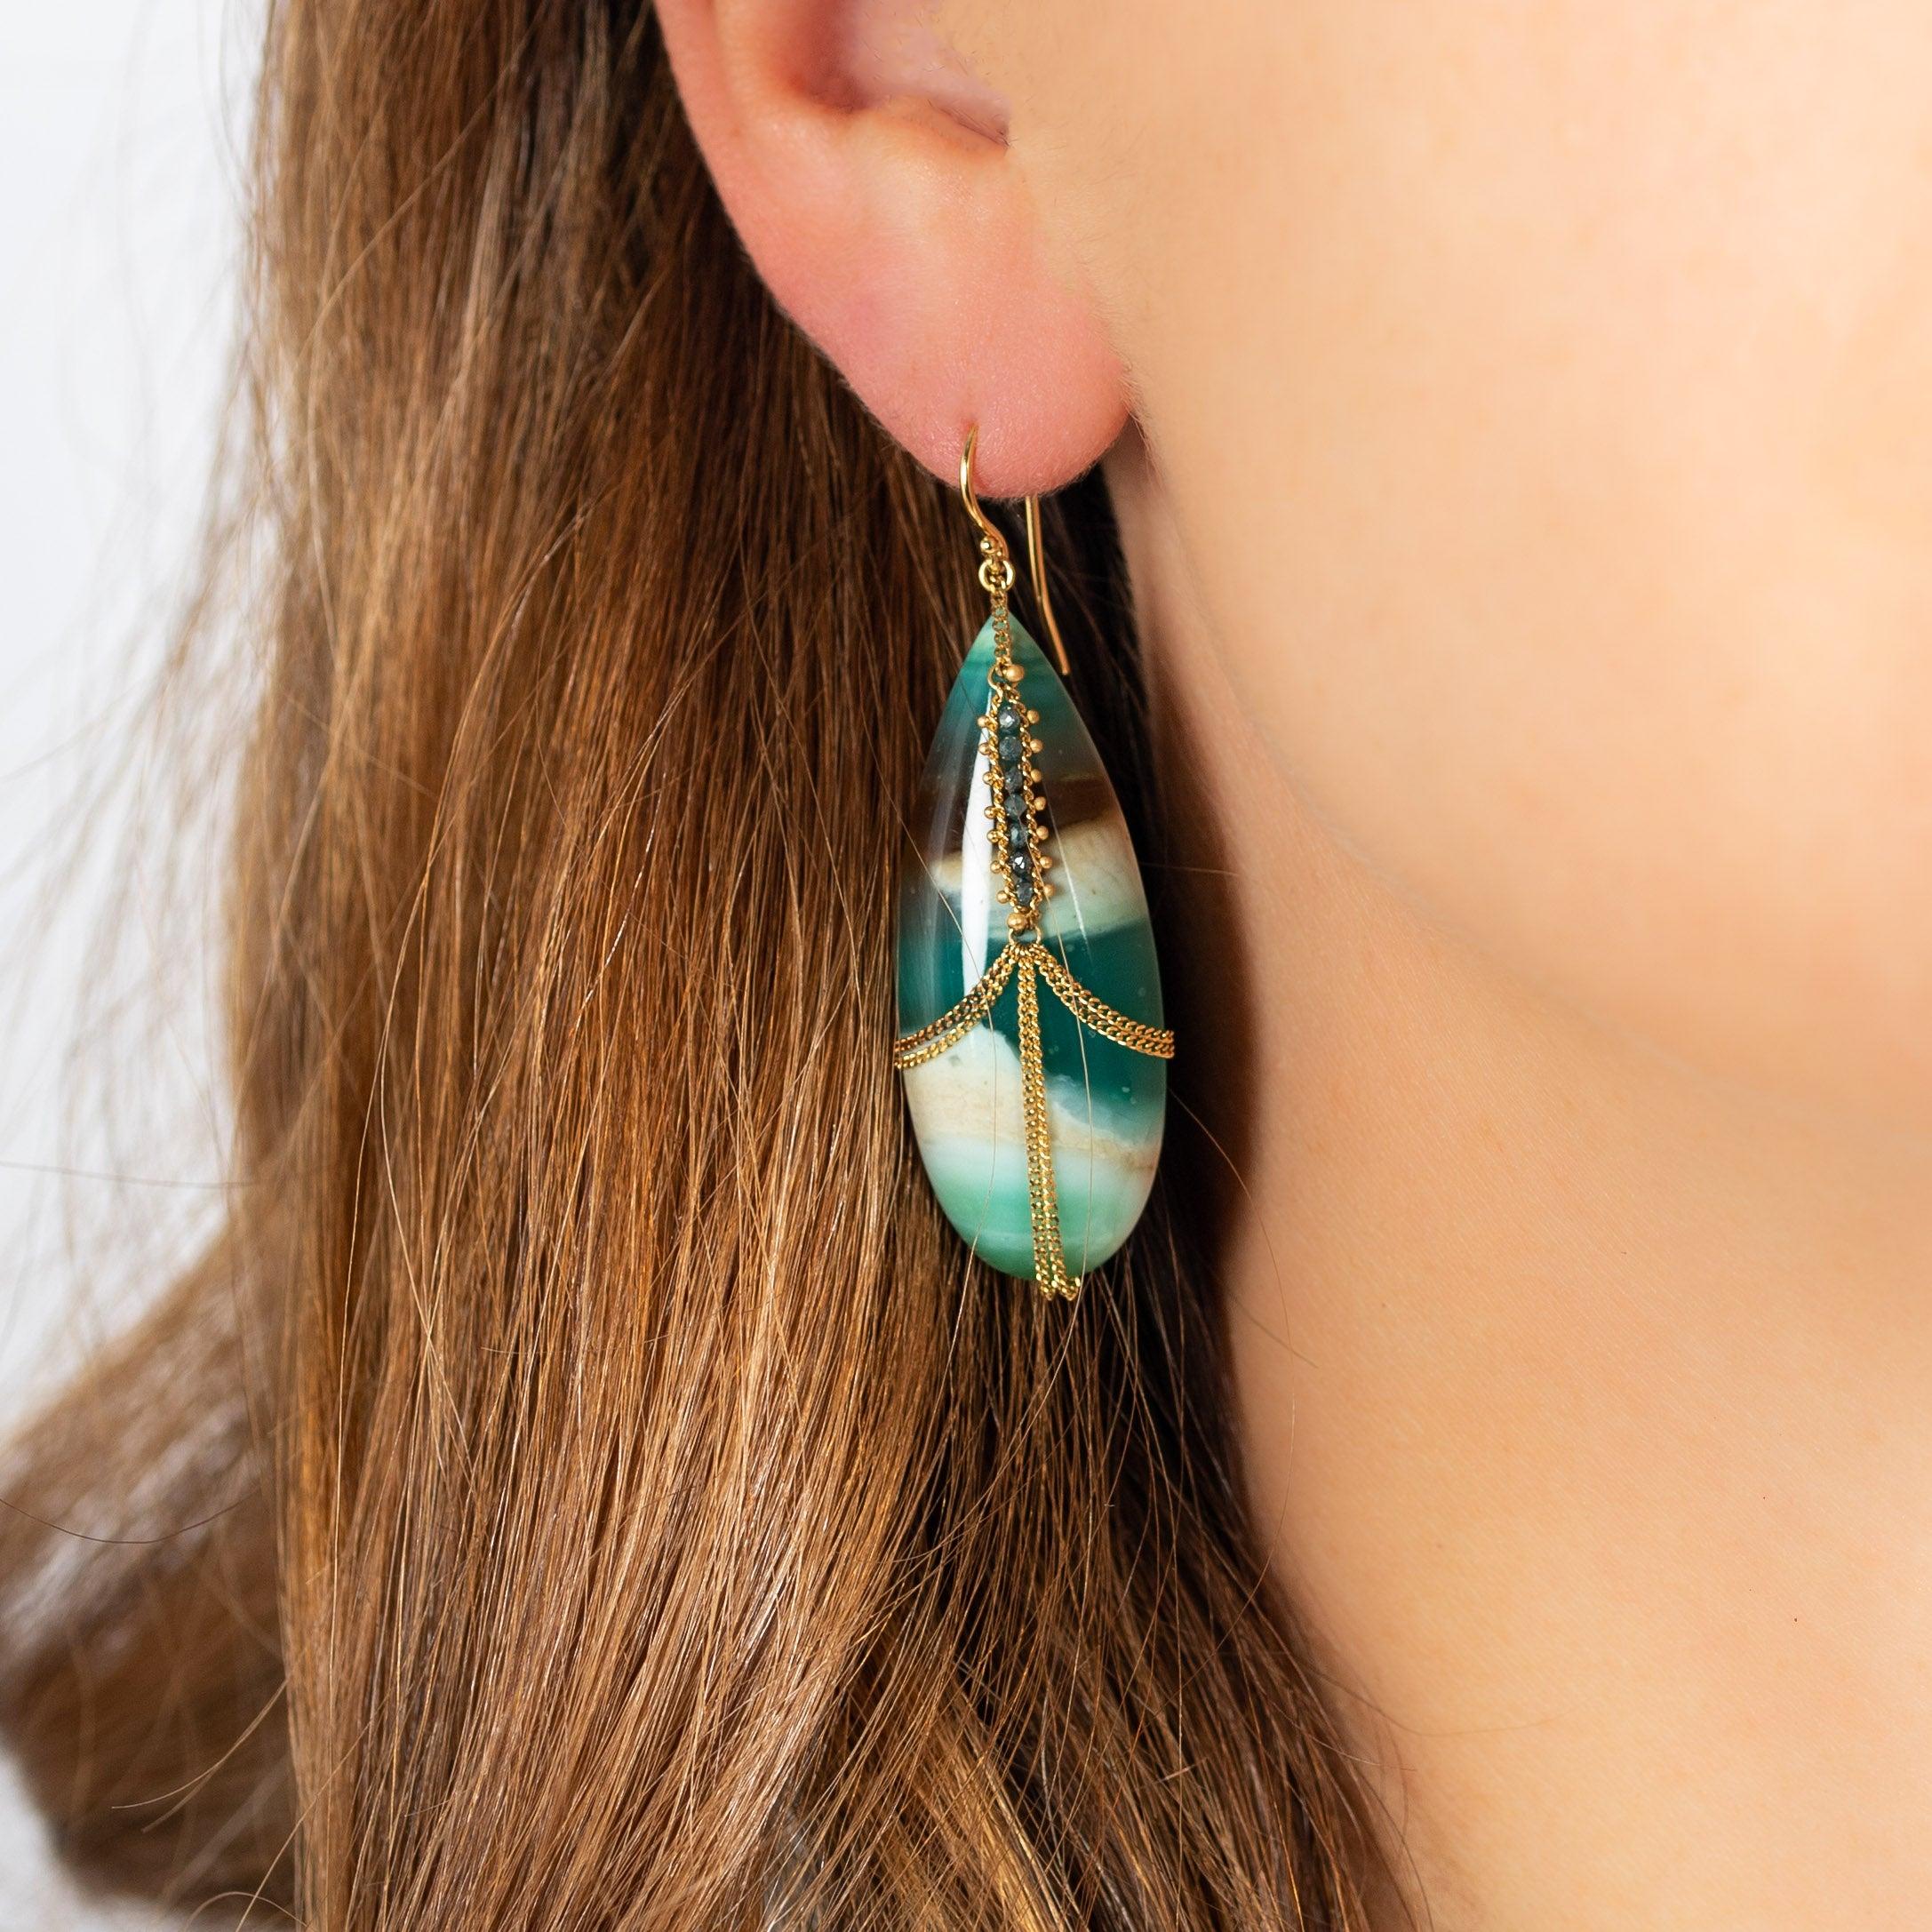 The colorway of these two Petrified Wood and Boulder Opal teardrops reminds us of sunrise over an ancient forest, the wide expanse of the sky swirled with light and shadow above a velvety green vista. We honor the beauty of these exquisite natural